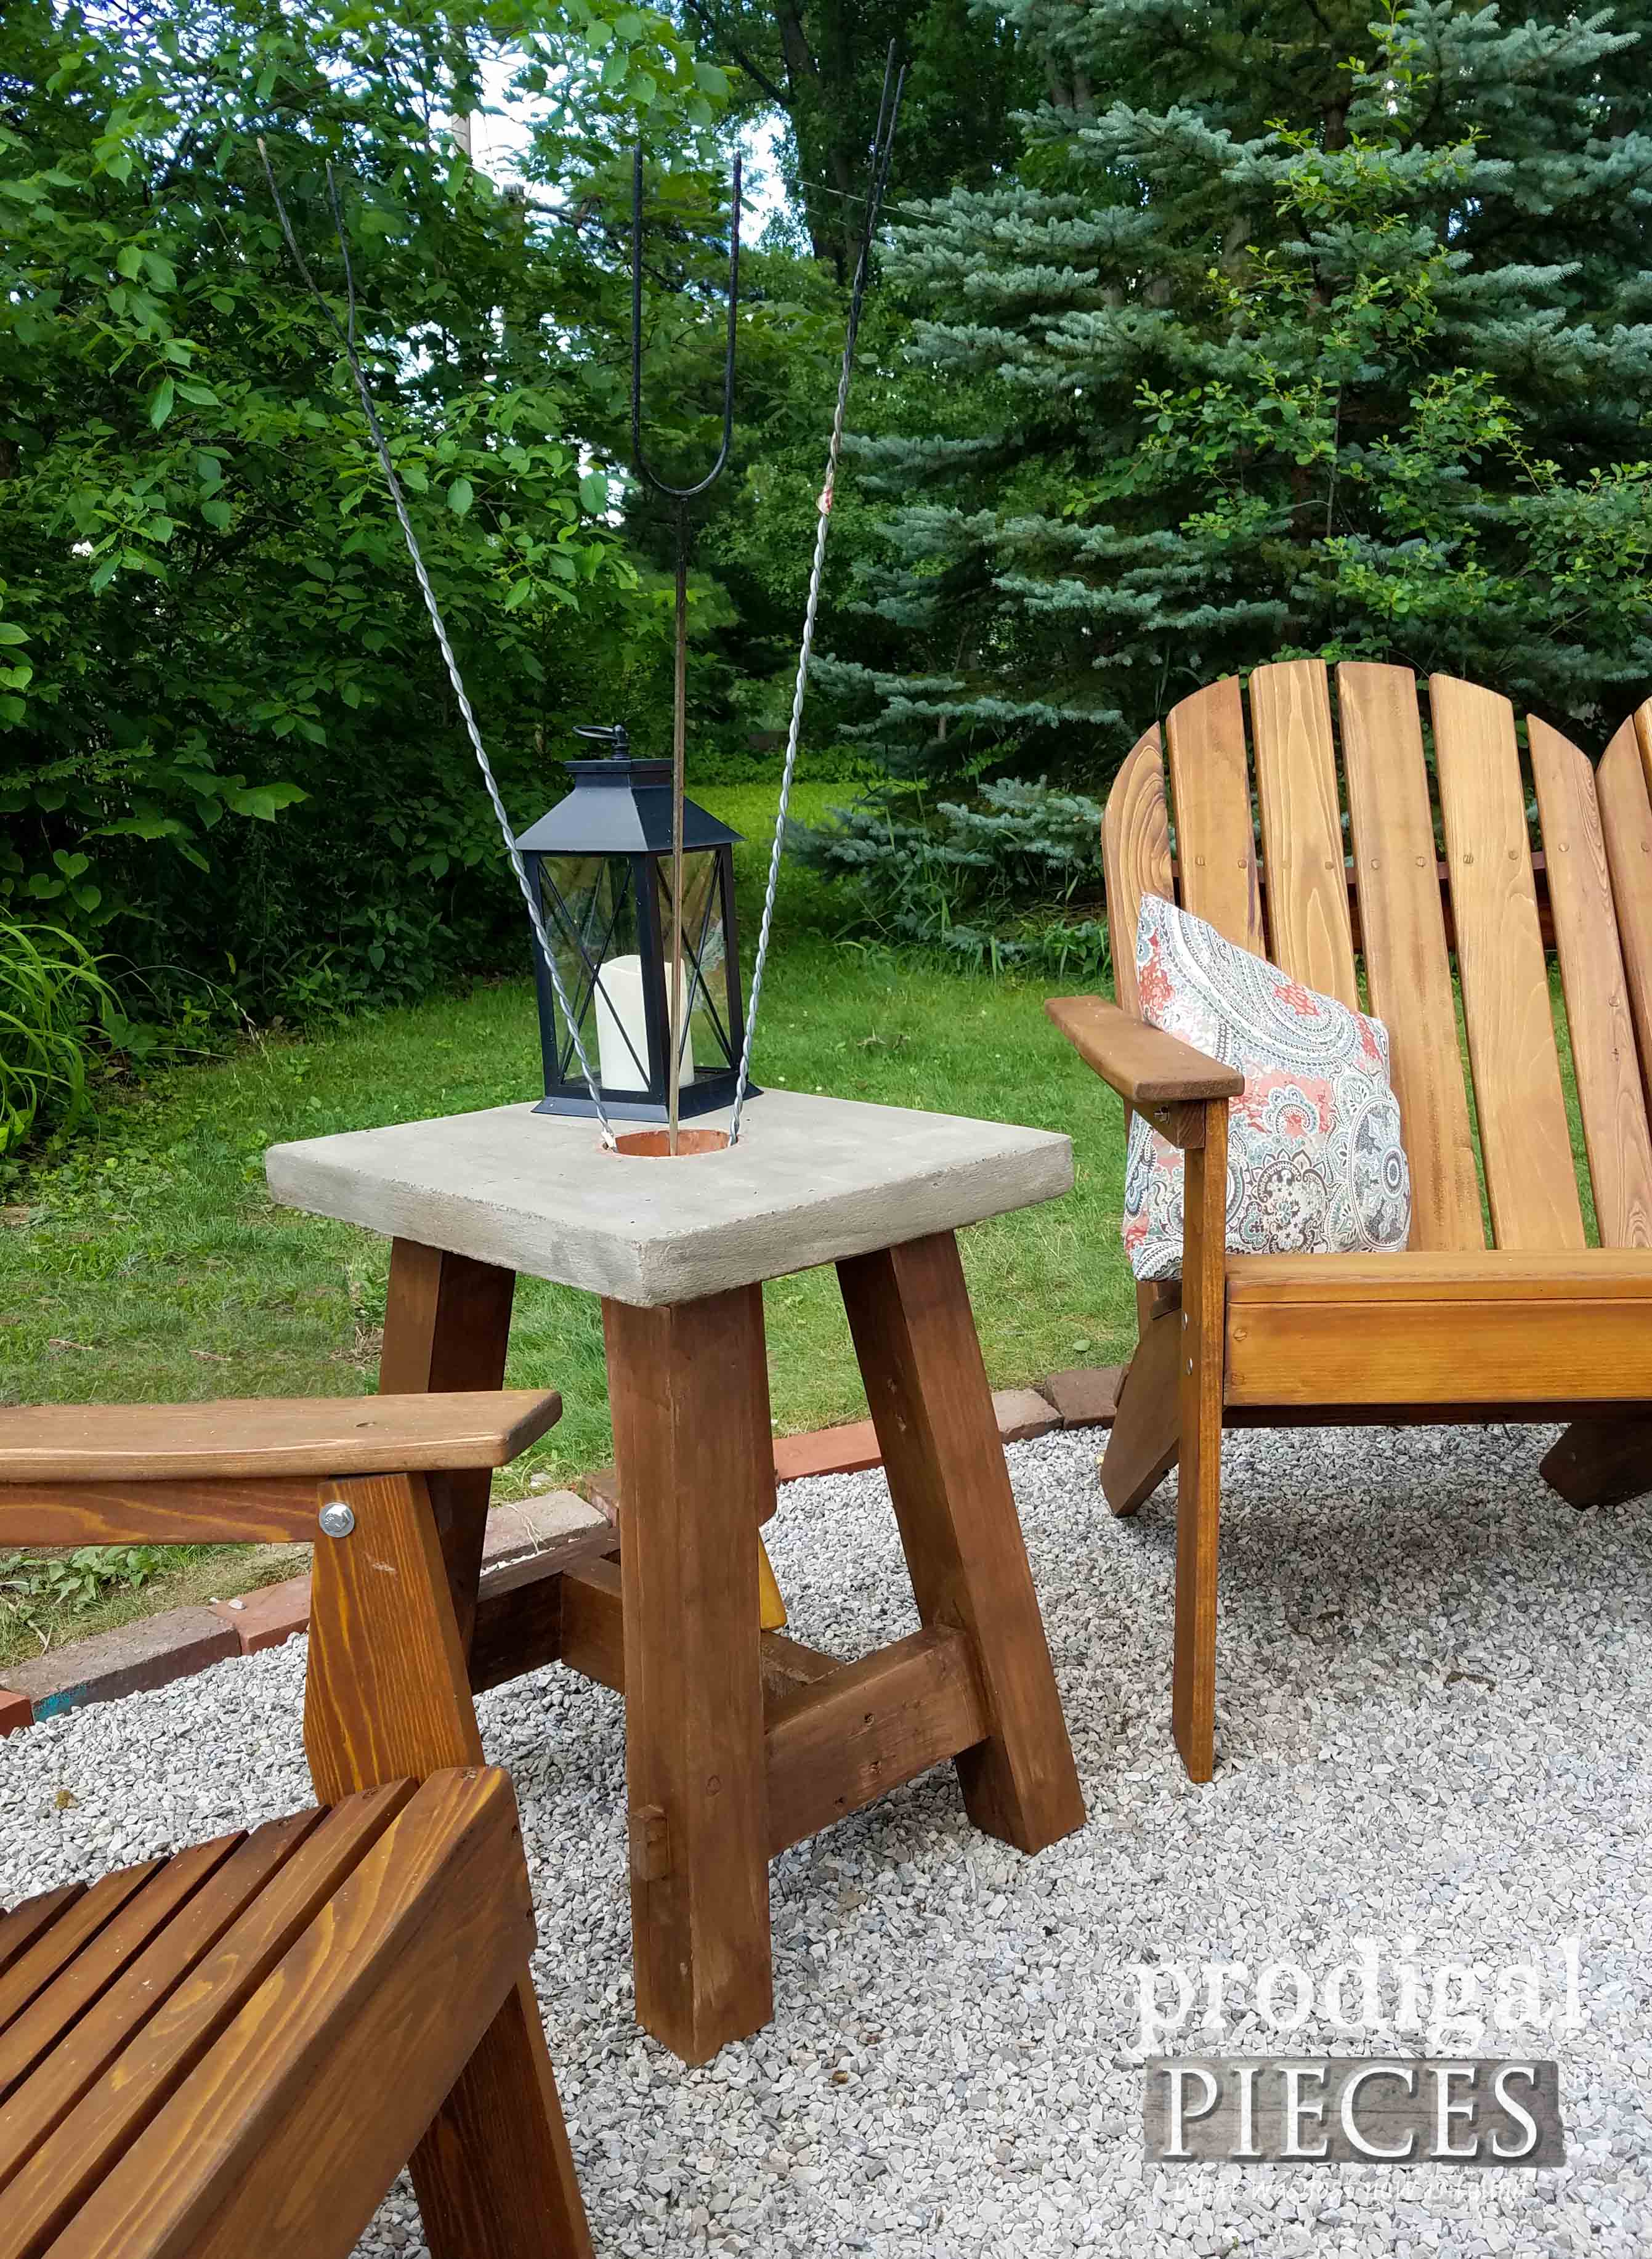 Concrete Table for Fire Pit with Roasting Stick Holder. DIY Build Plans by Prodigal Pieces | prodigalpieces.com